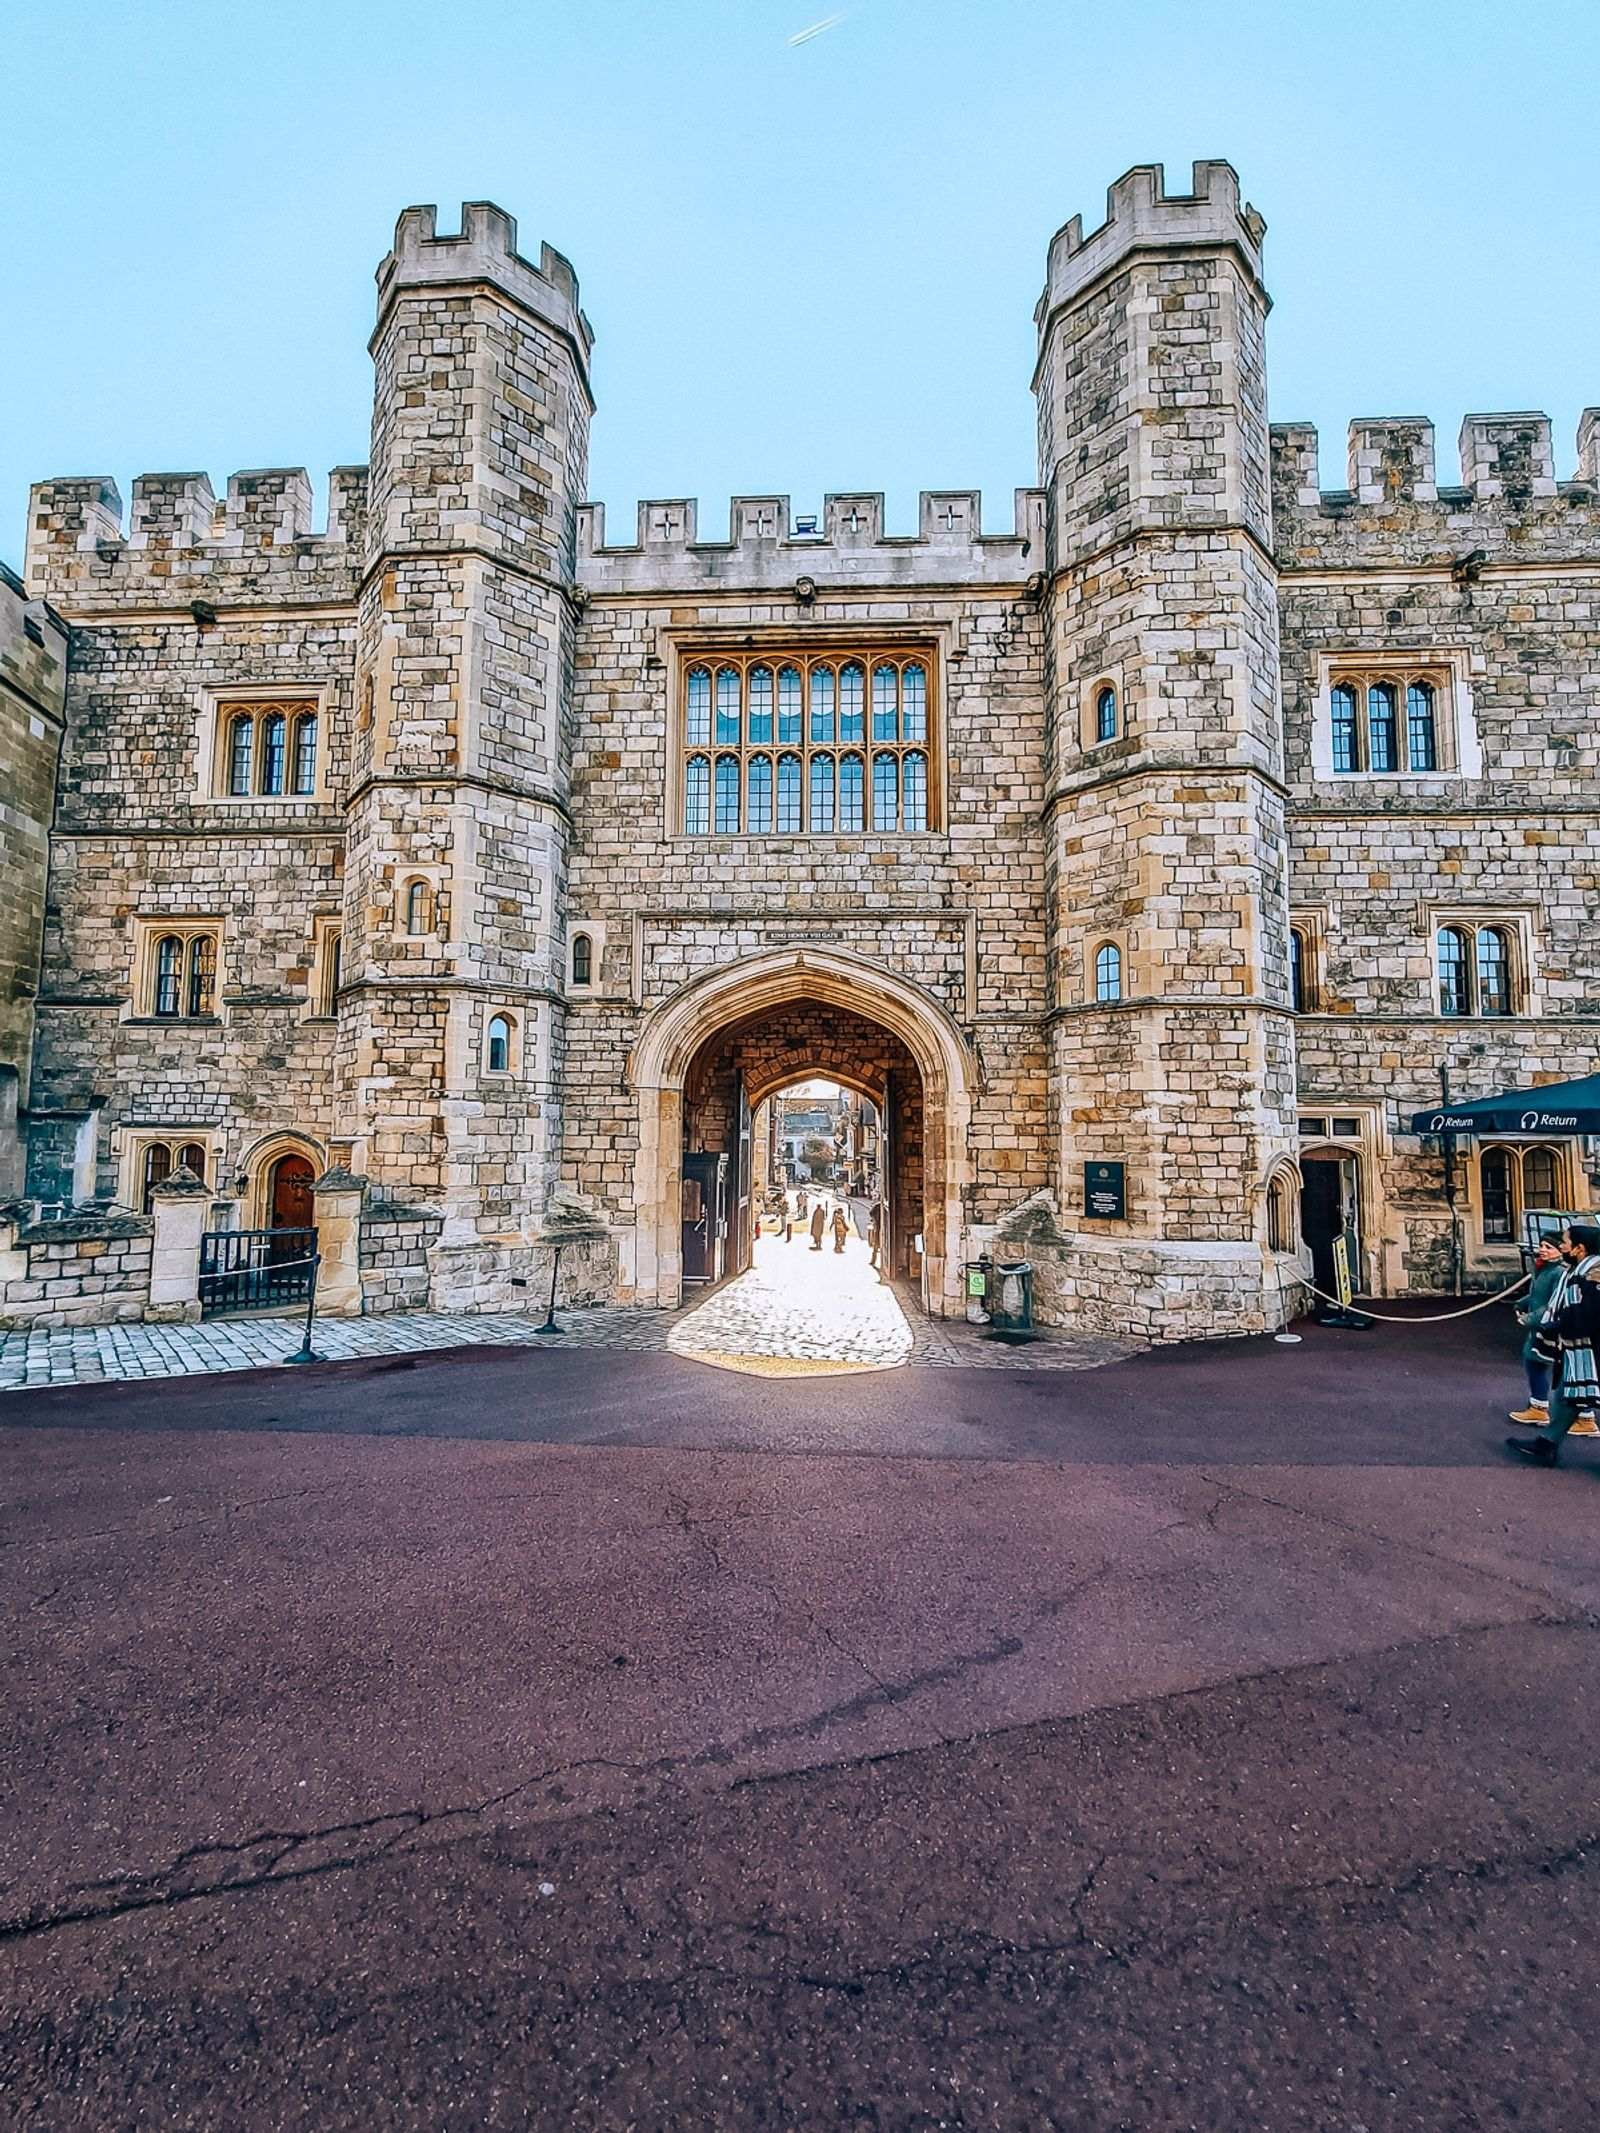 large stone towers and archway entrance to Windsor castle